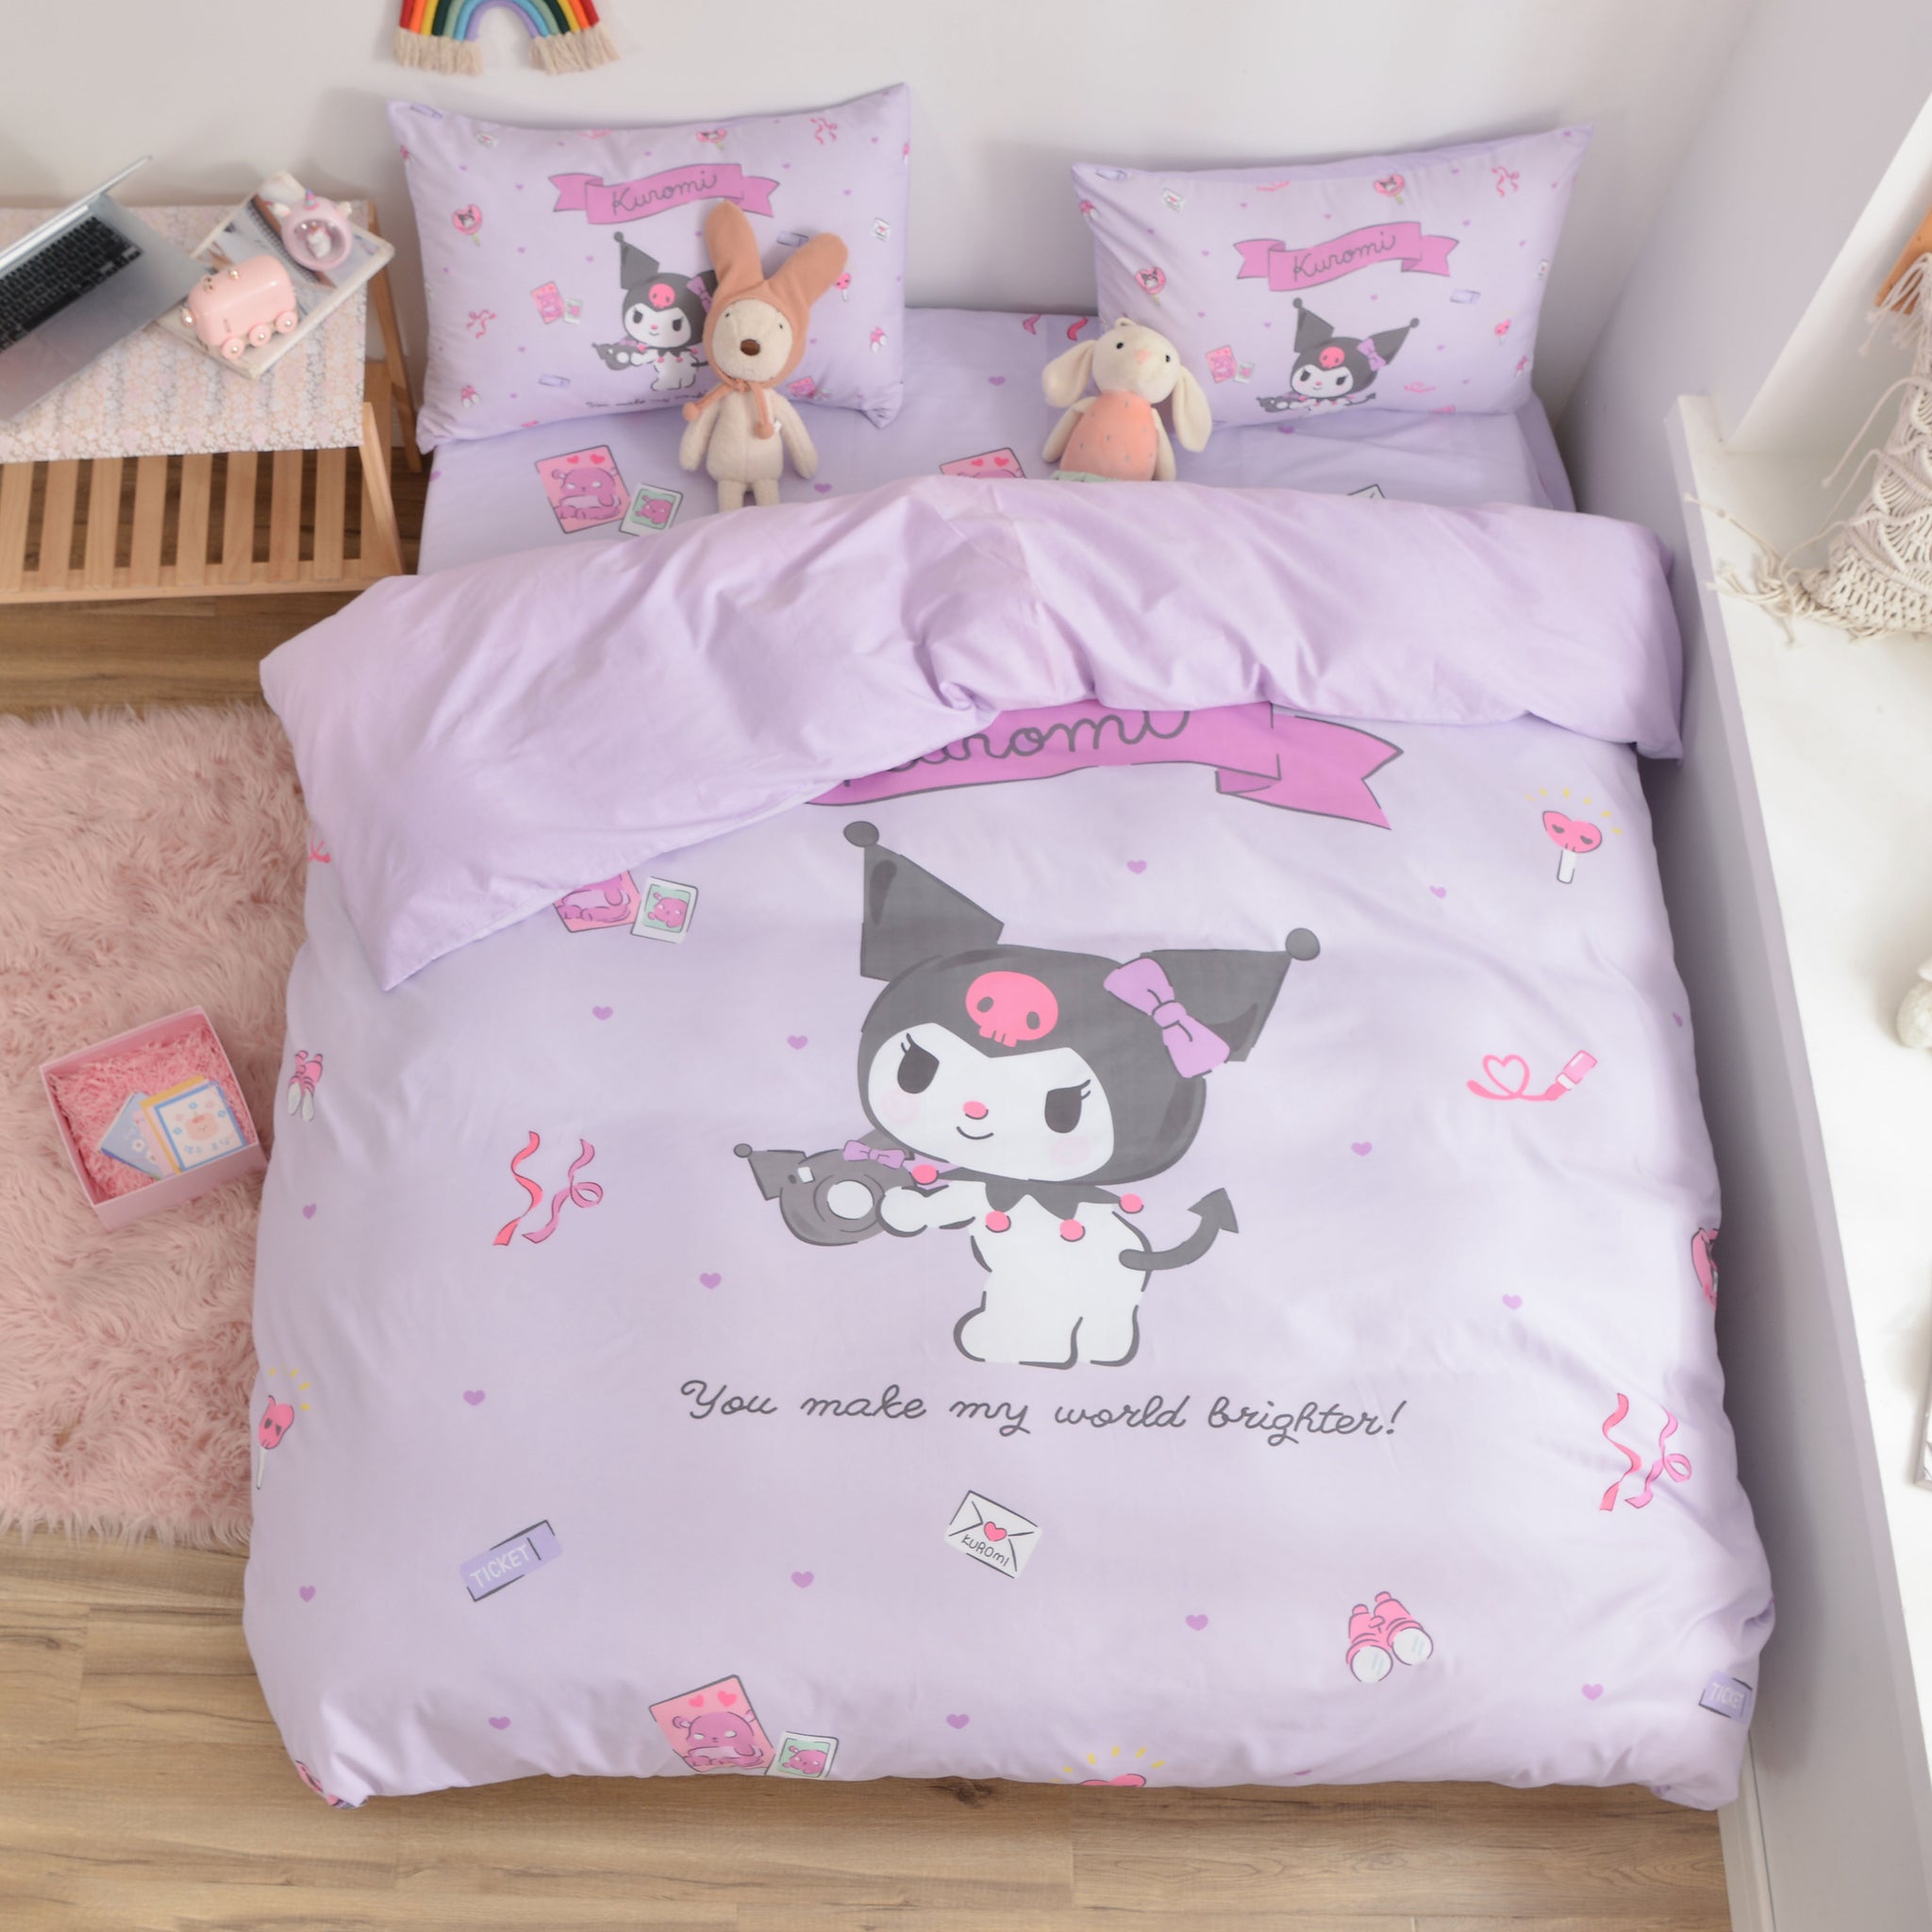 Sailor Moon's bedsheets, now on sale, are the most chaste anime bedding  we've seen in a long time | SoraNews24 -Japan News-